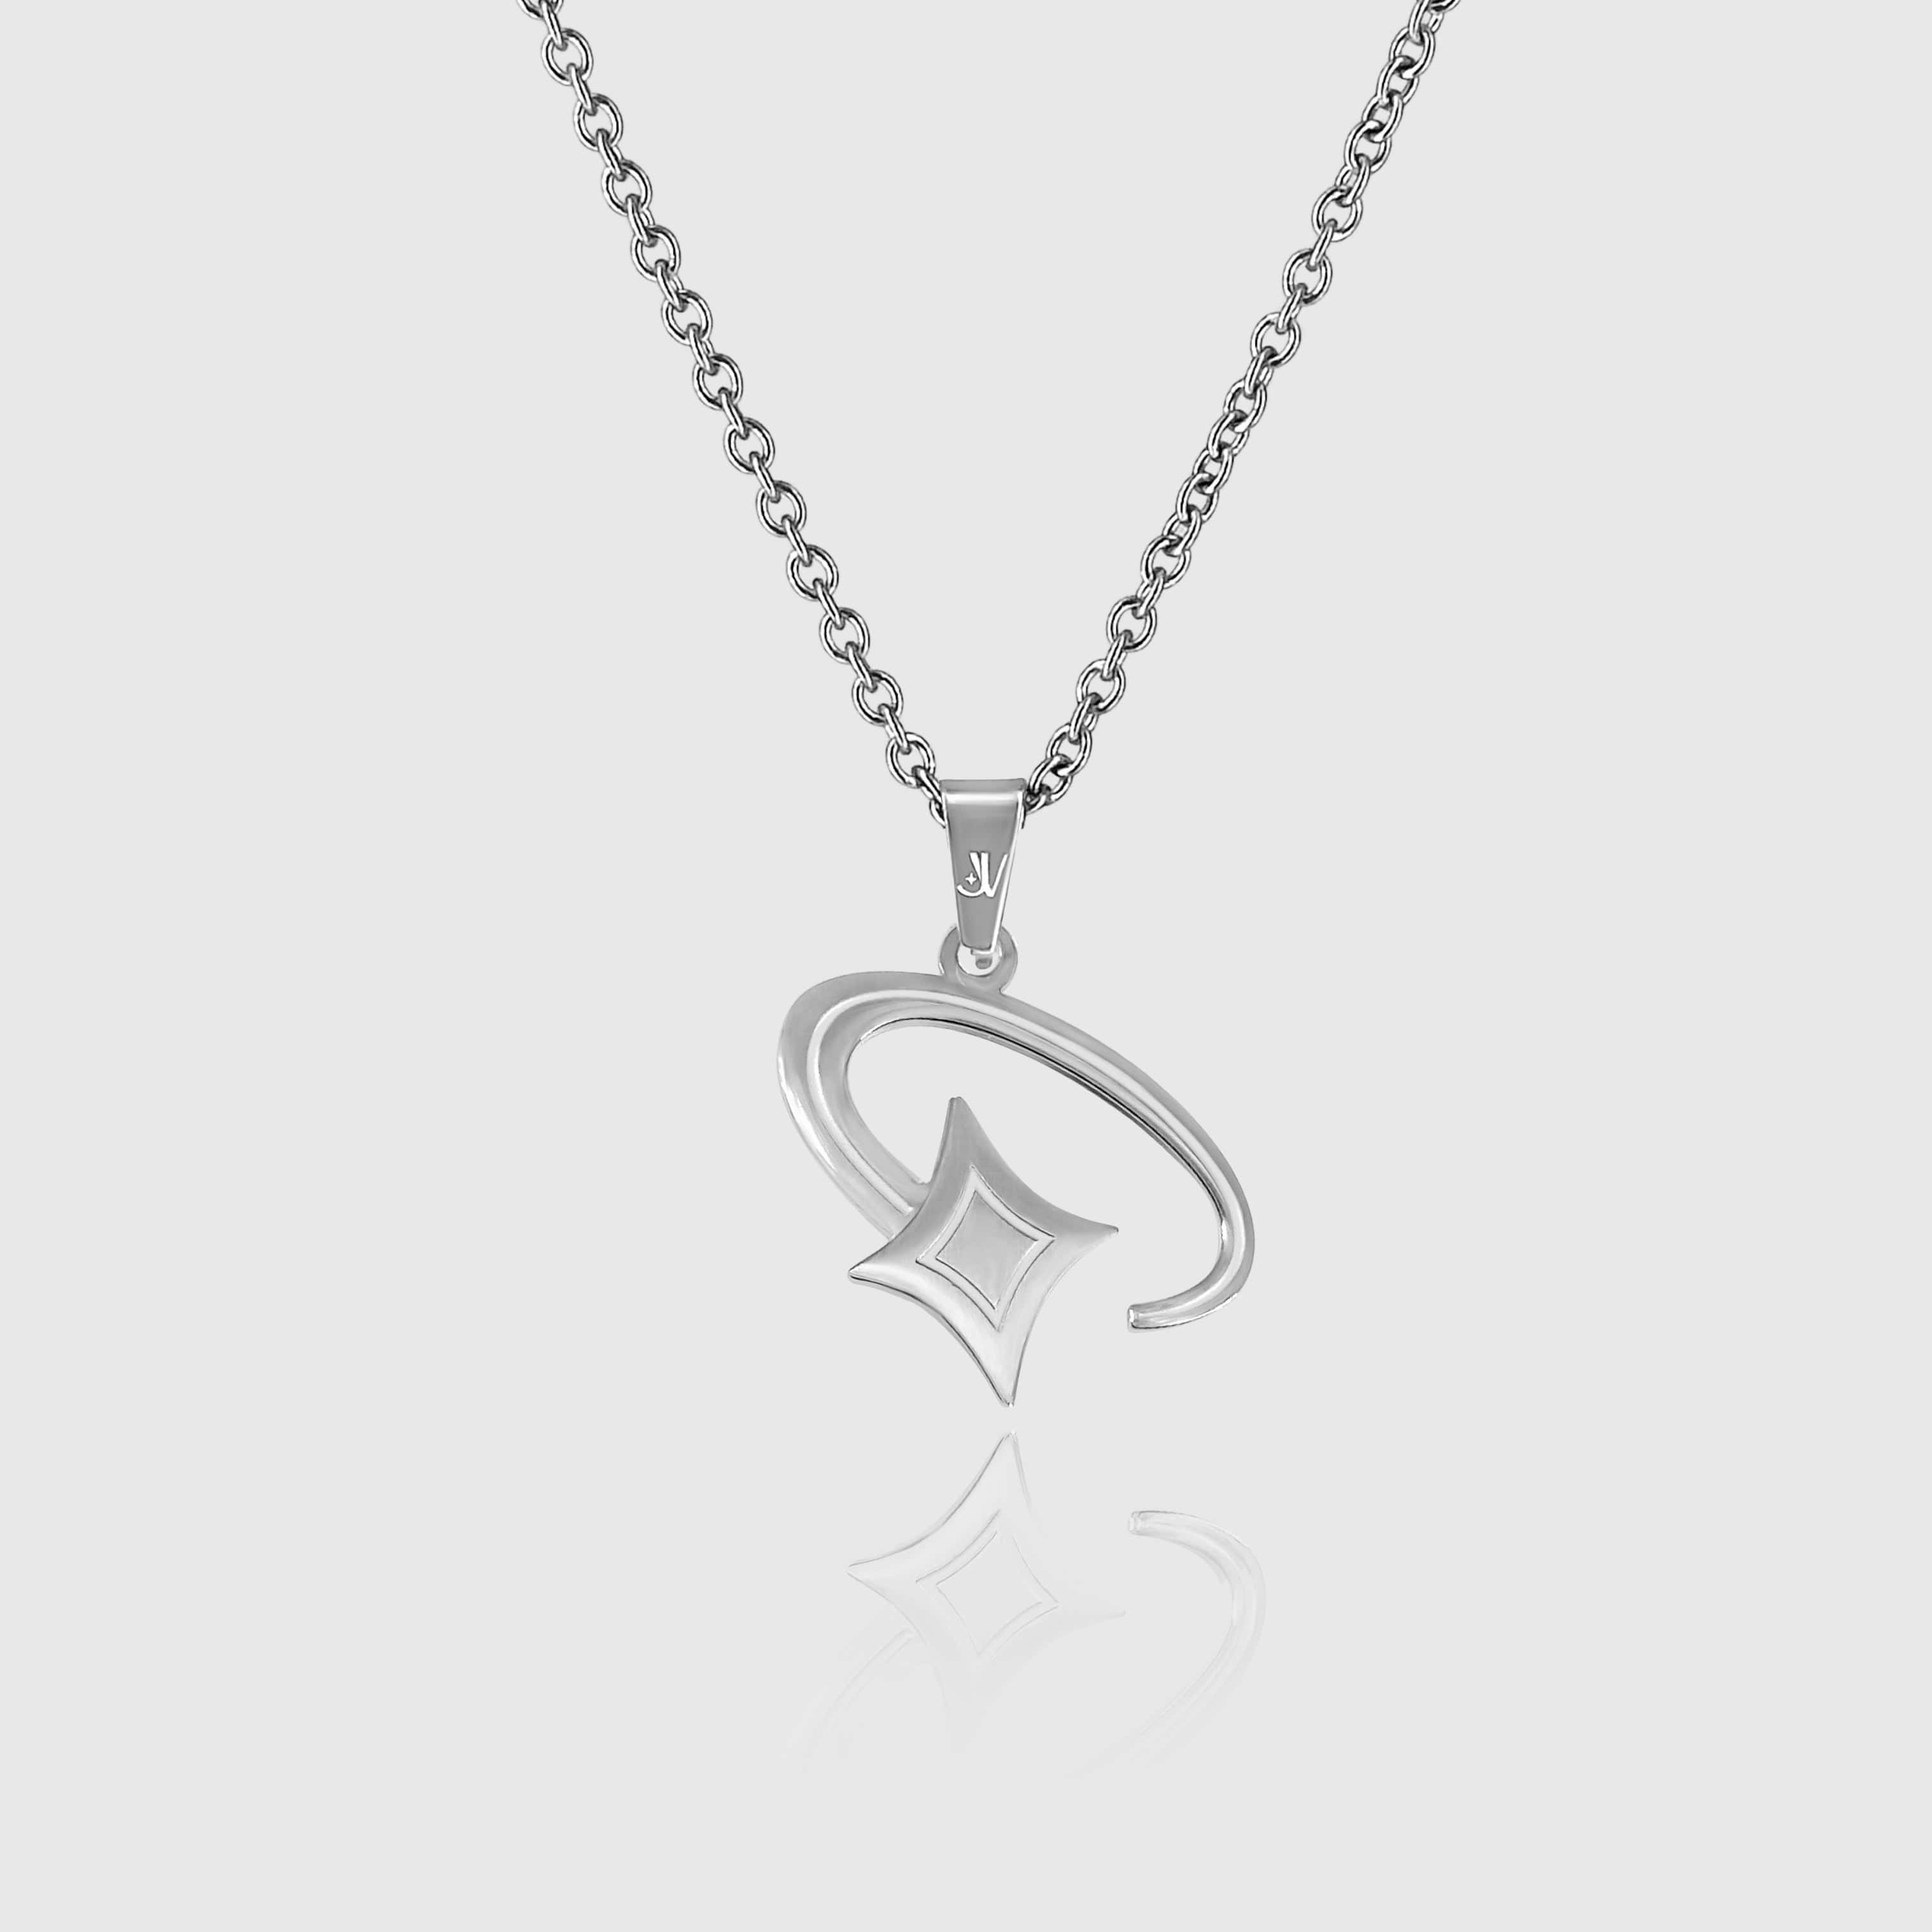 Chain with Pendant Shooting Star Rolo Chain - Silver (2mm) - JVillion®